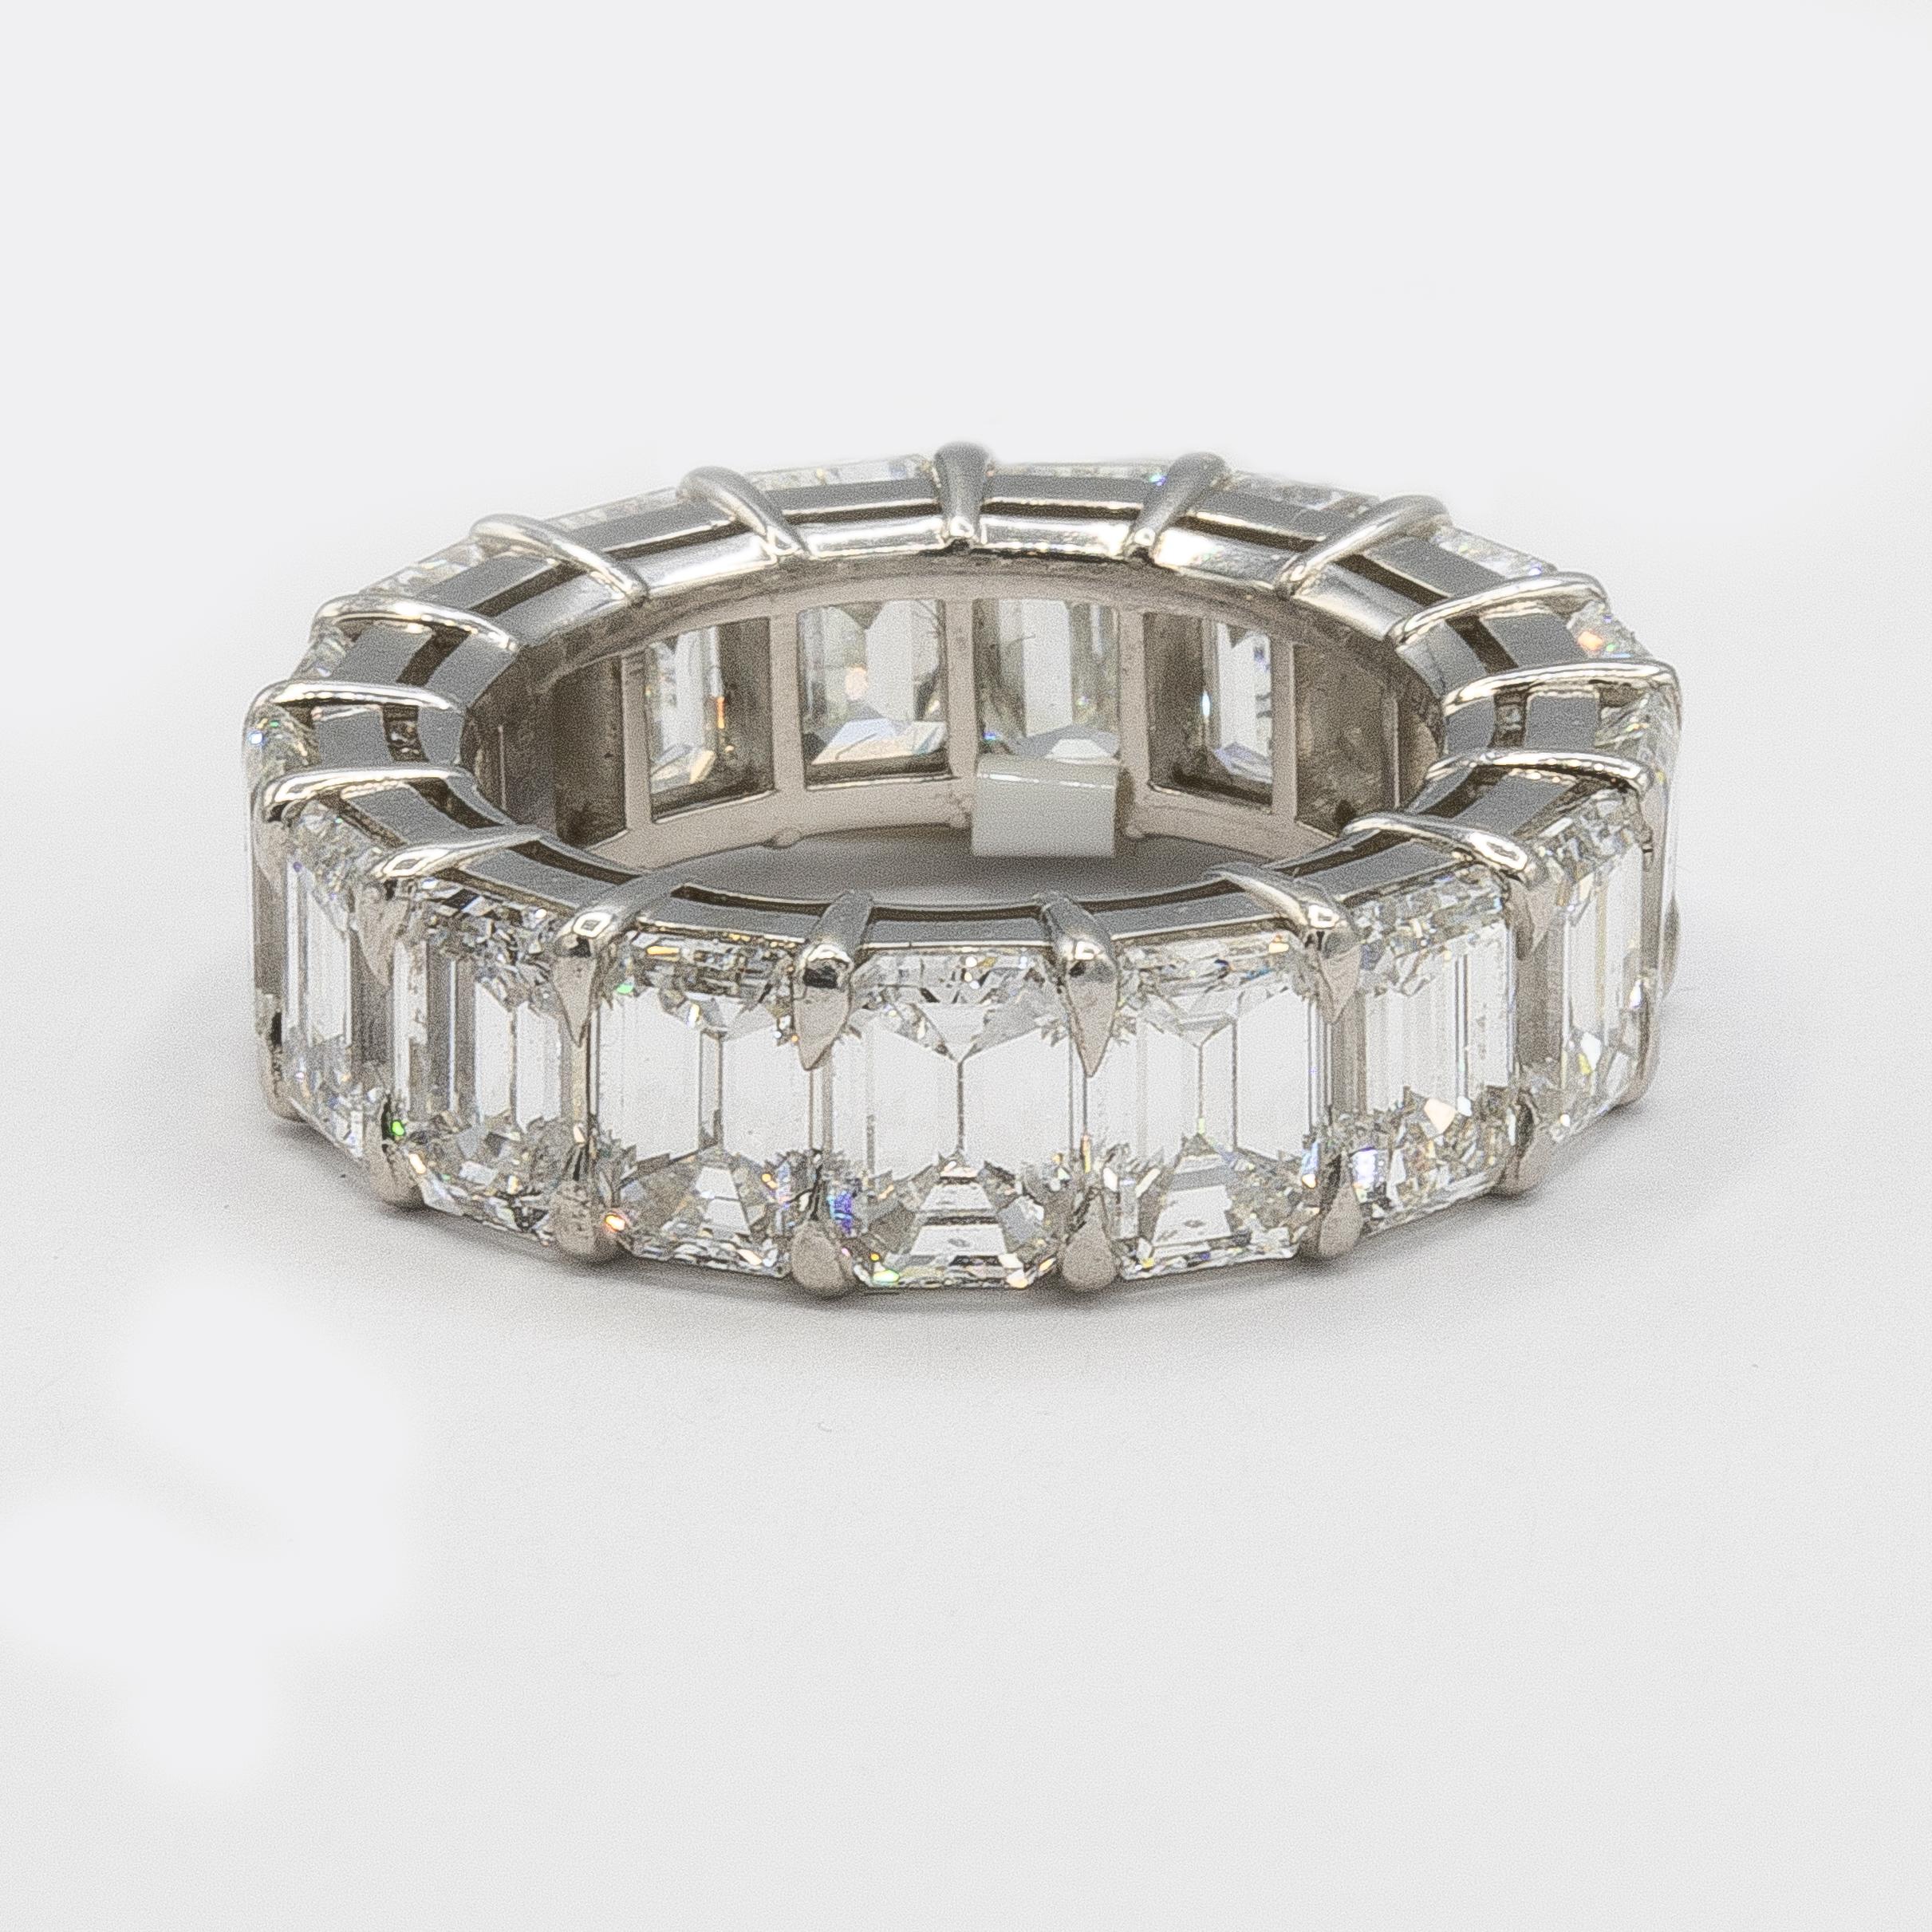 Emerald-Cut Diamond Wedding Band features a full circle of emerald-cut diamonds set in a shared-prong platinum setting.

17 Diamonds weighing a total of approximately 10.36 carats.

Diamonds = 10.36 carats
( Color: D-E, Clarity: VS )
Platinum
Ring